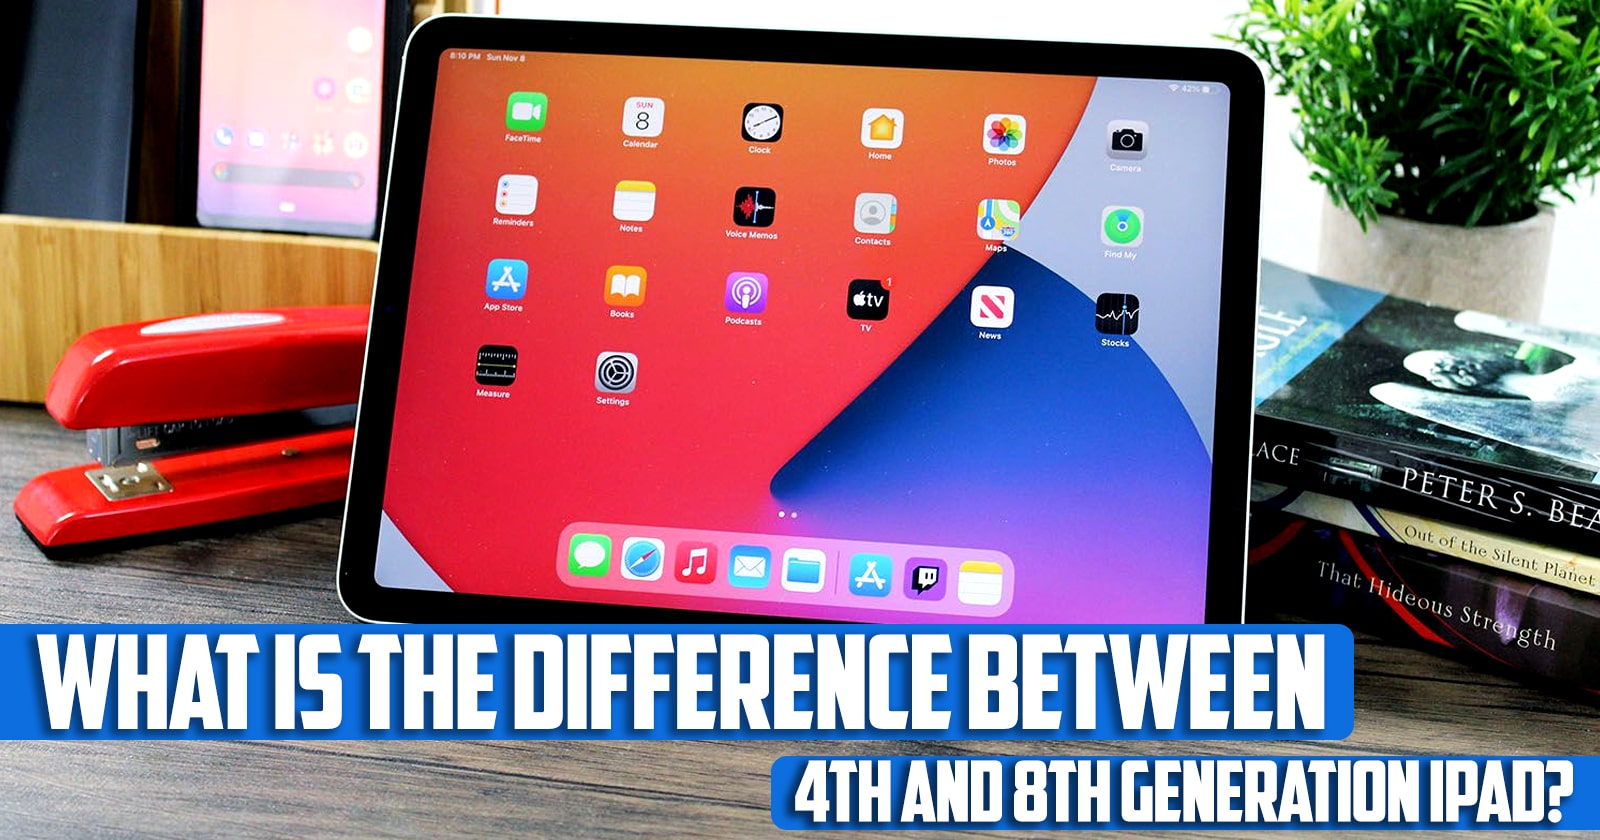 What is the difference between 4th and 8th generation iPad?